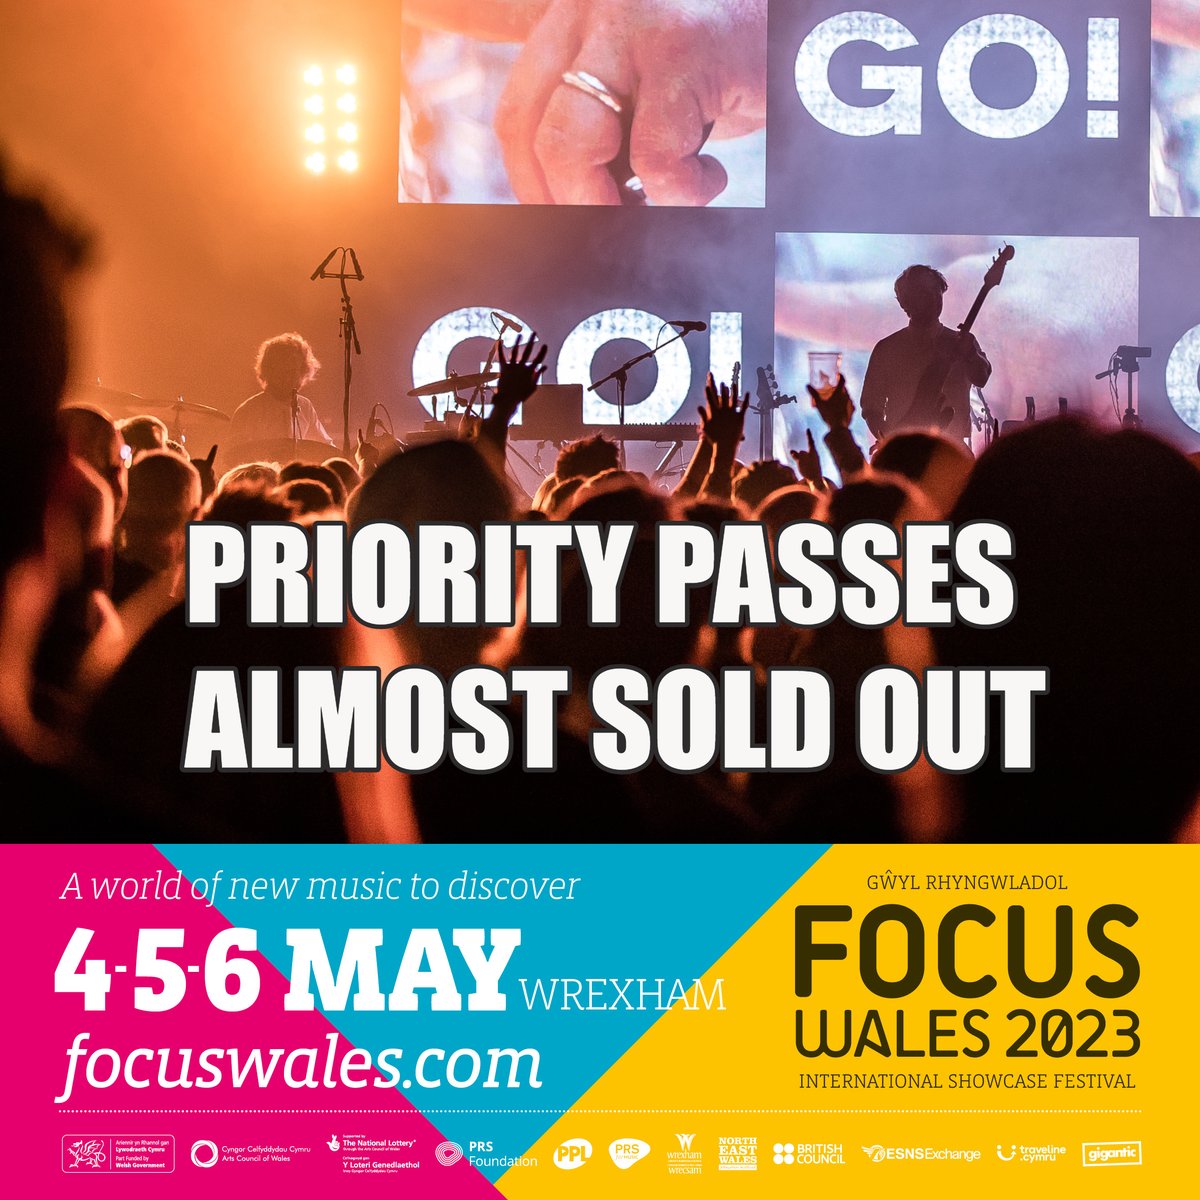 ⌛ Priority Passes for FOCUS Wales 2023 have almost sold out, get yours while you can! focuswales.com #Festival #Wales #Wrexham